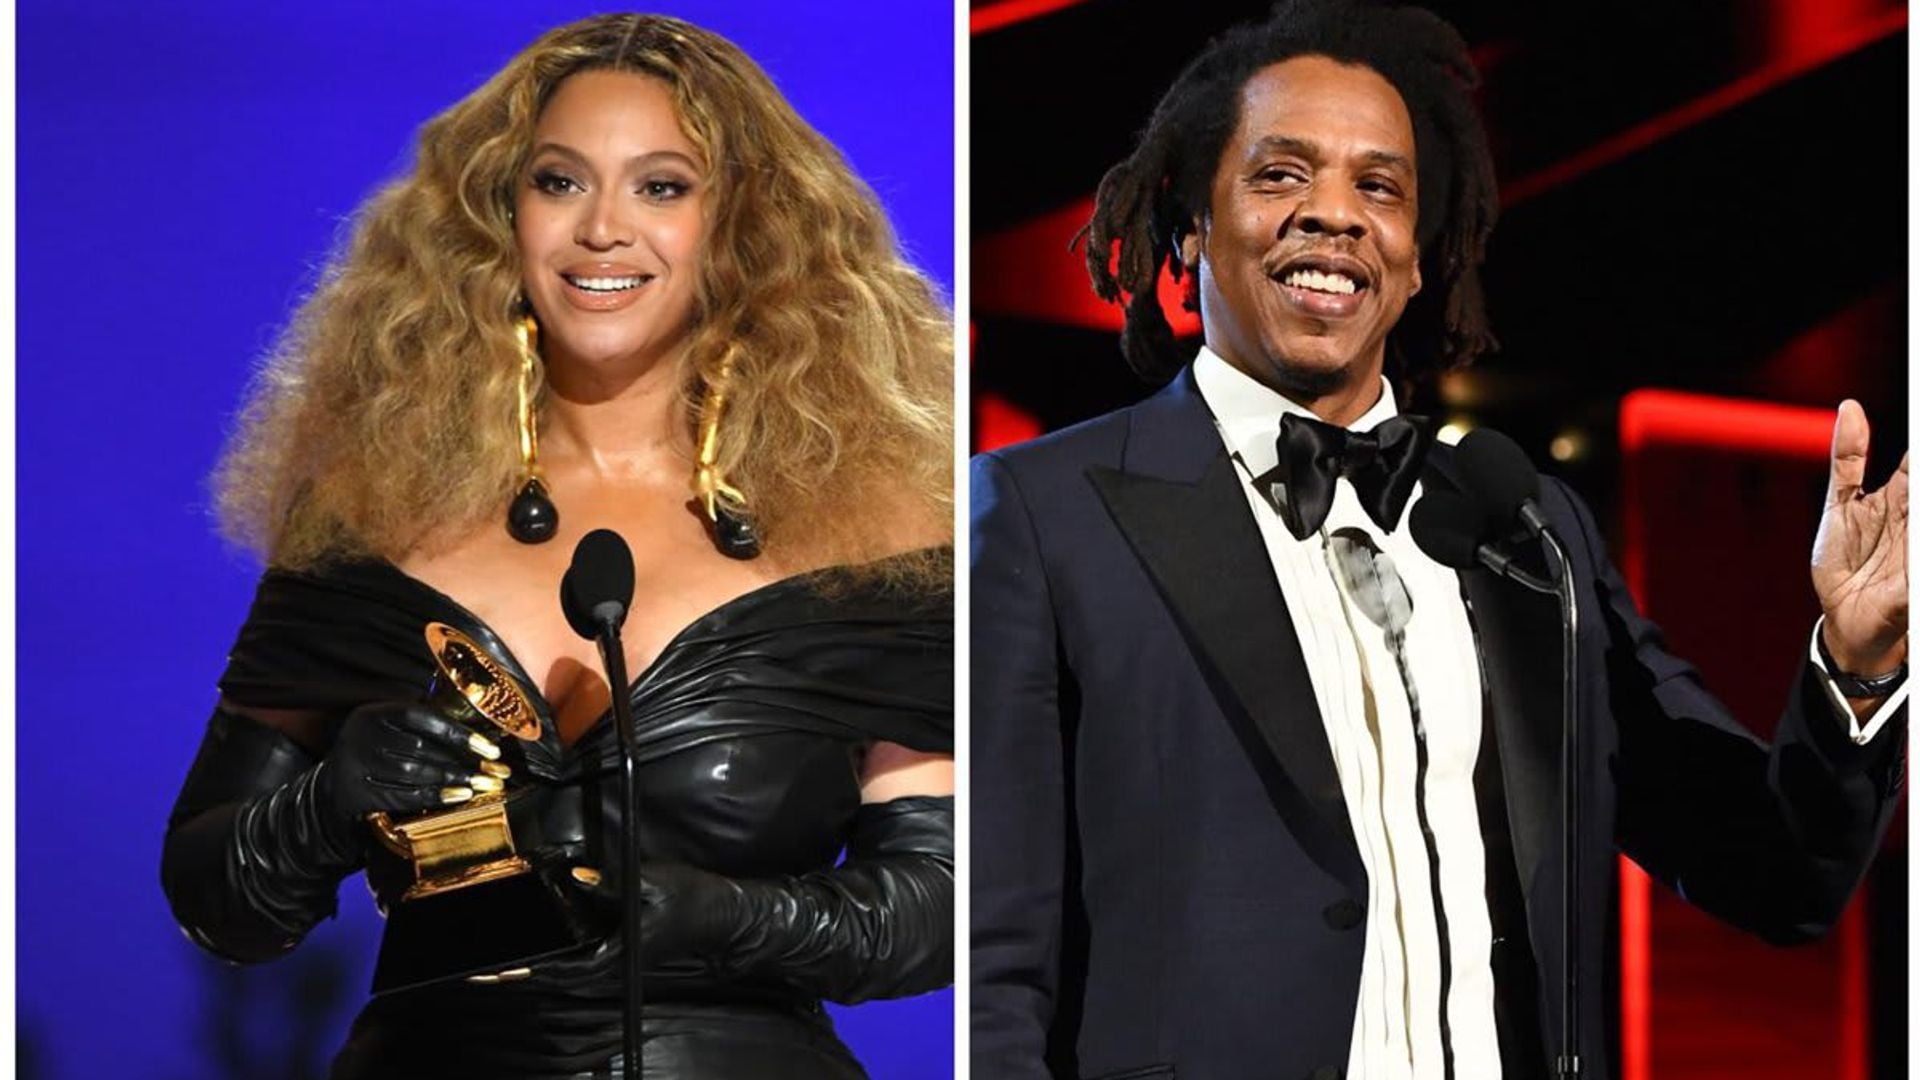 Beyoncé and Jay-Z make Oscar history competing for Best Original Song